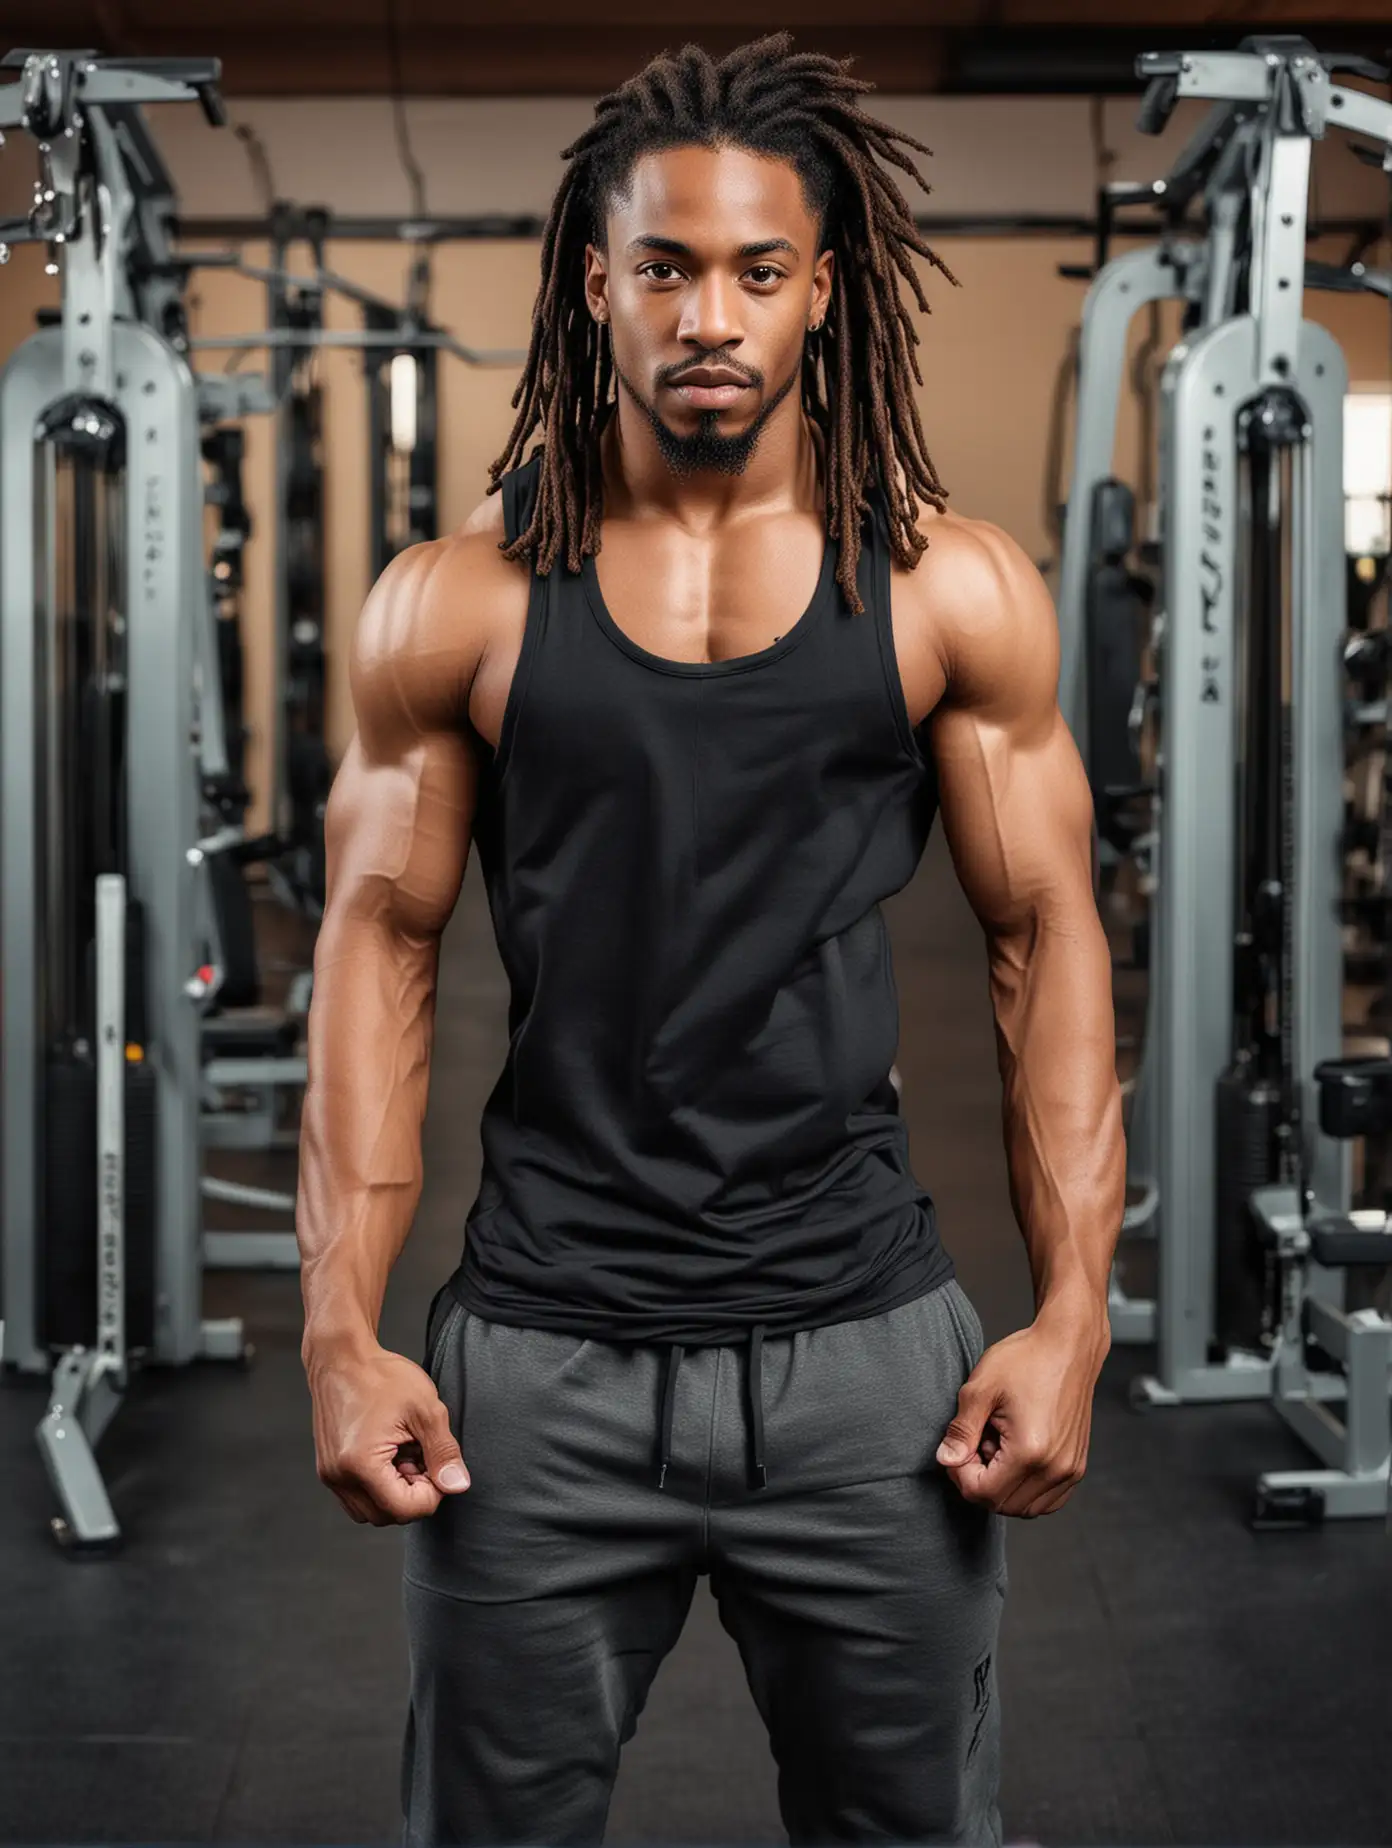 African American Male Bodybuilder Posing in Gym Front Double Biceps Display